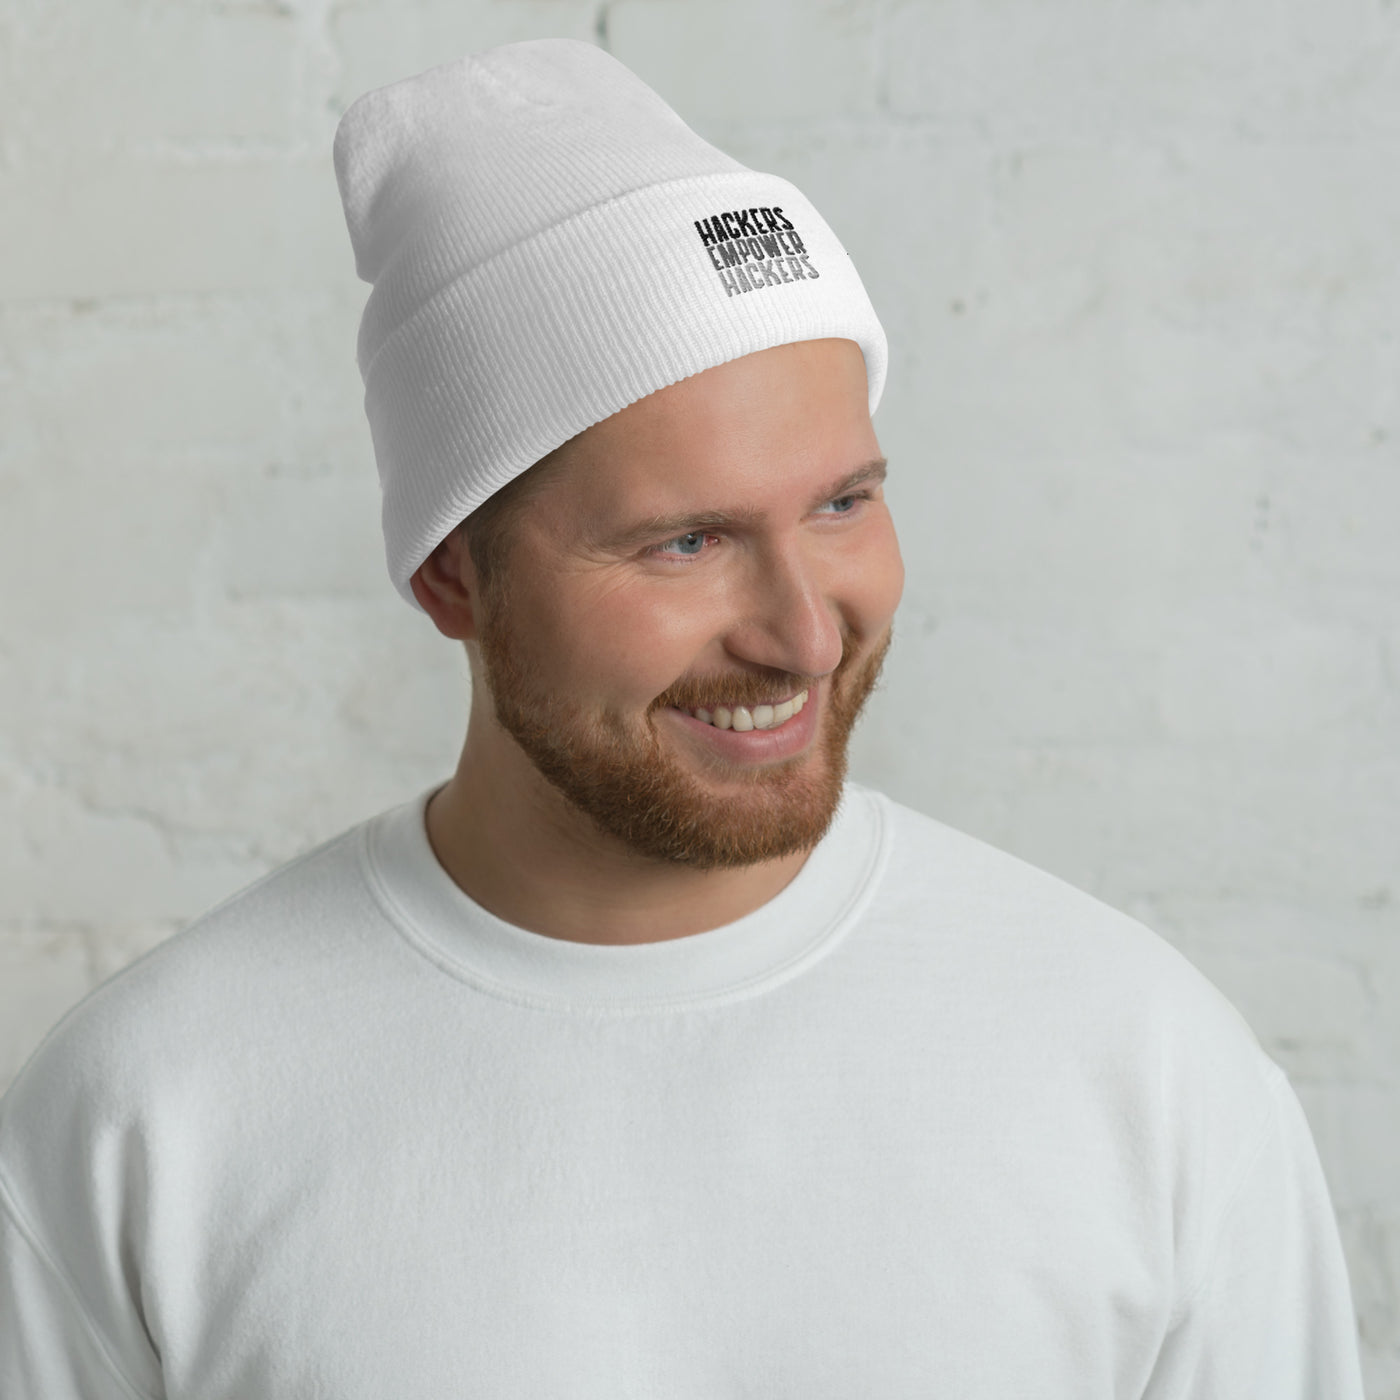 Hackers Empower Hackers - Cuffed Beanie